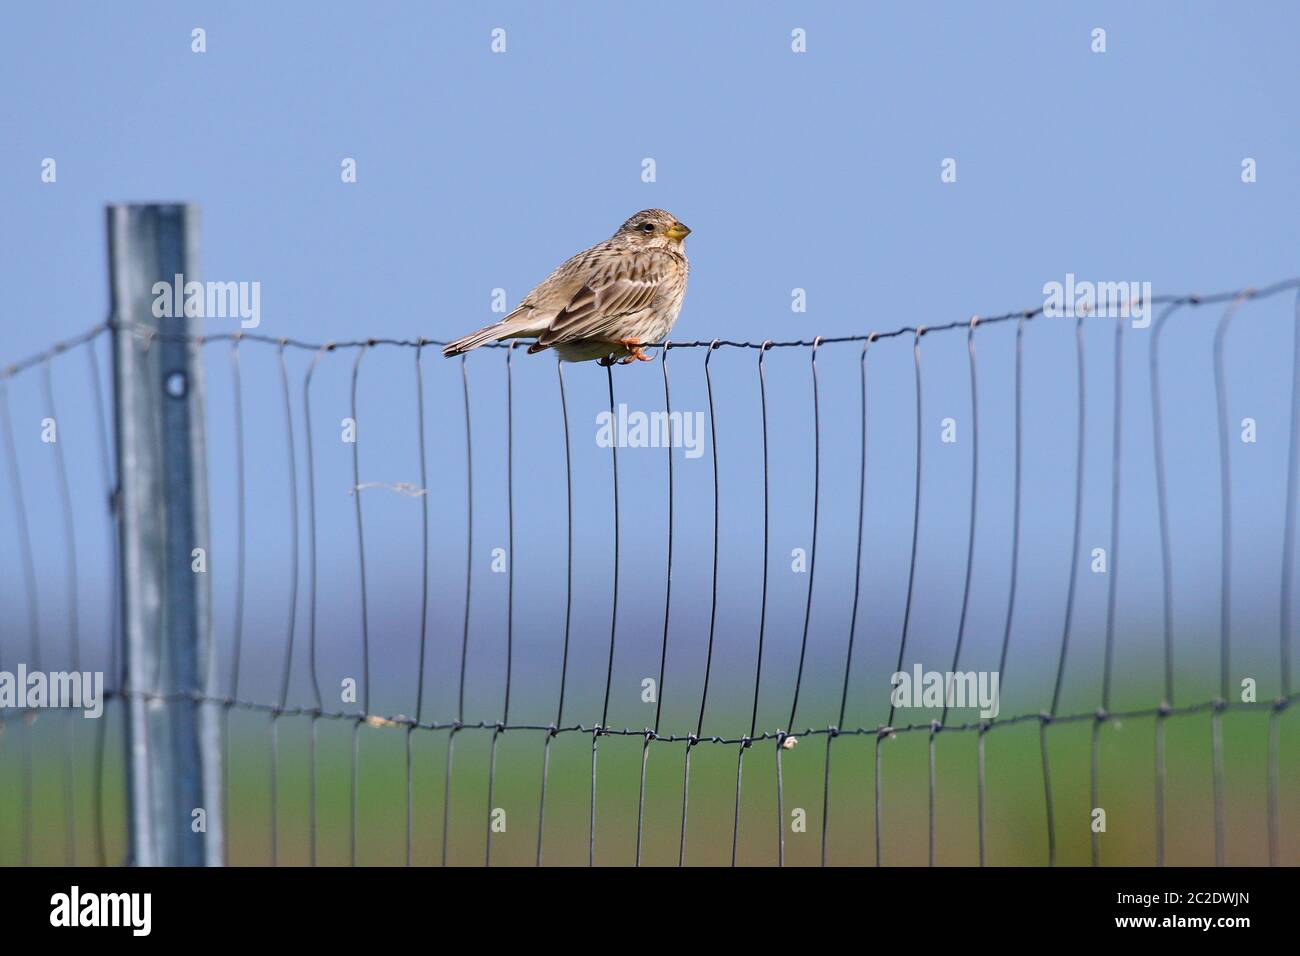 Corn bunting sit on a fence Stock Photo